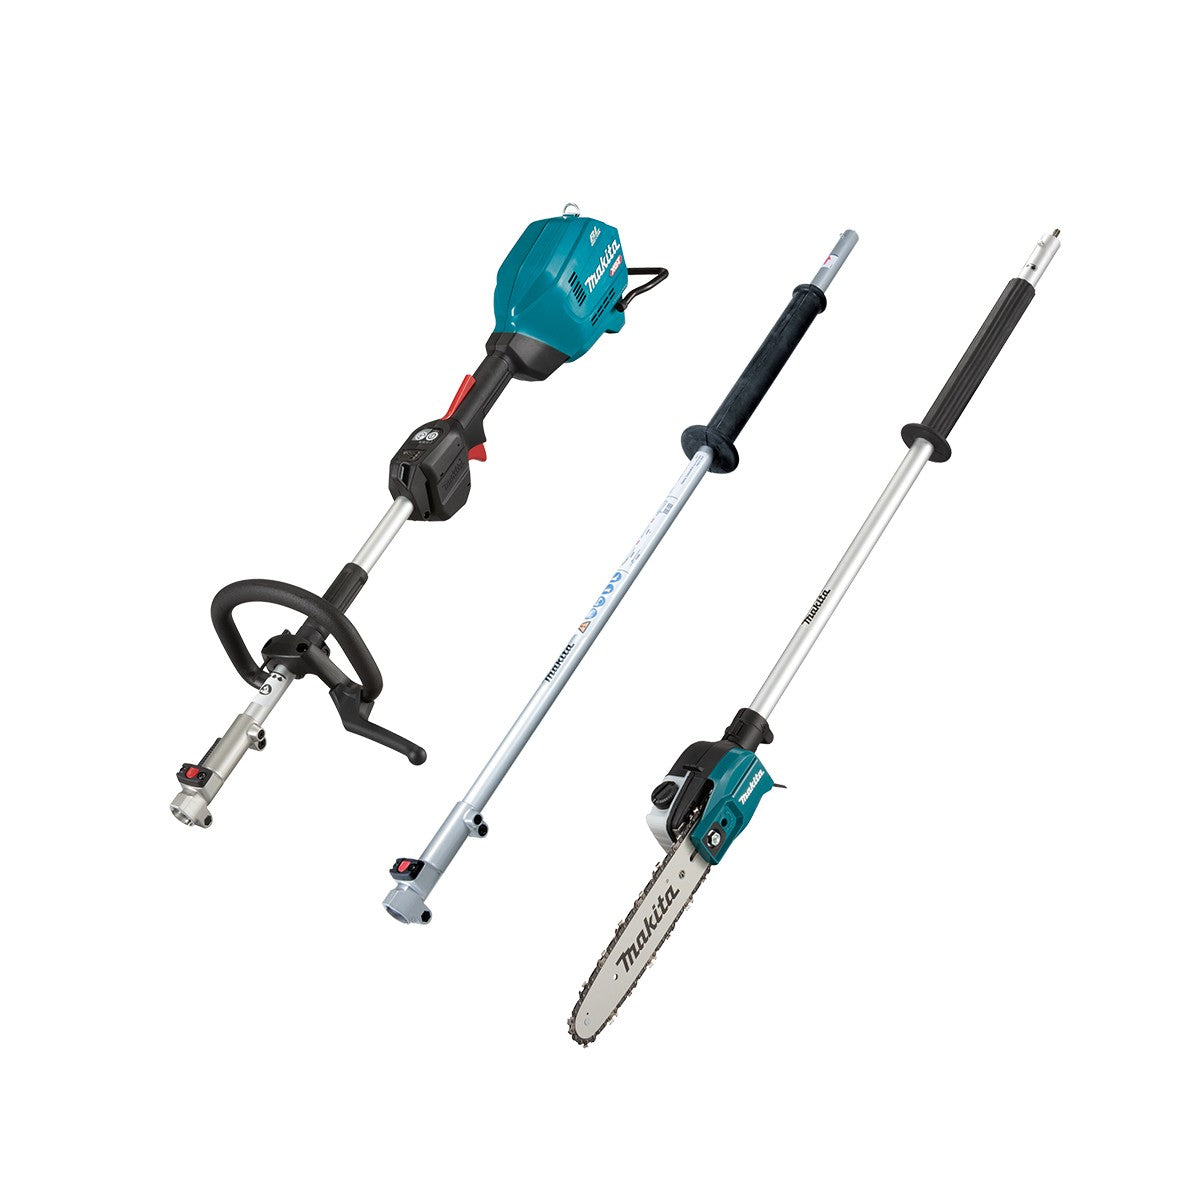 40V Max Brushless Multi Function Powerhead and Pole Saw (Tool Only) UX01GZ06 by Makita